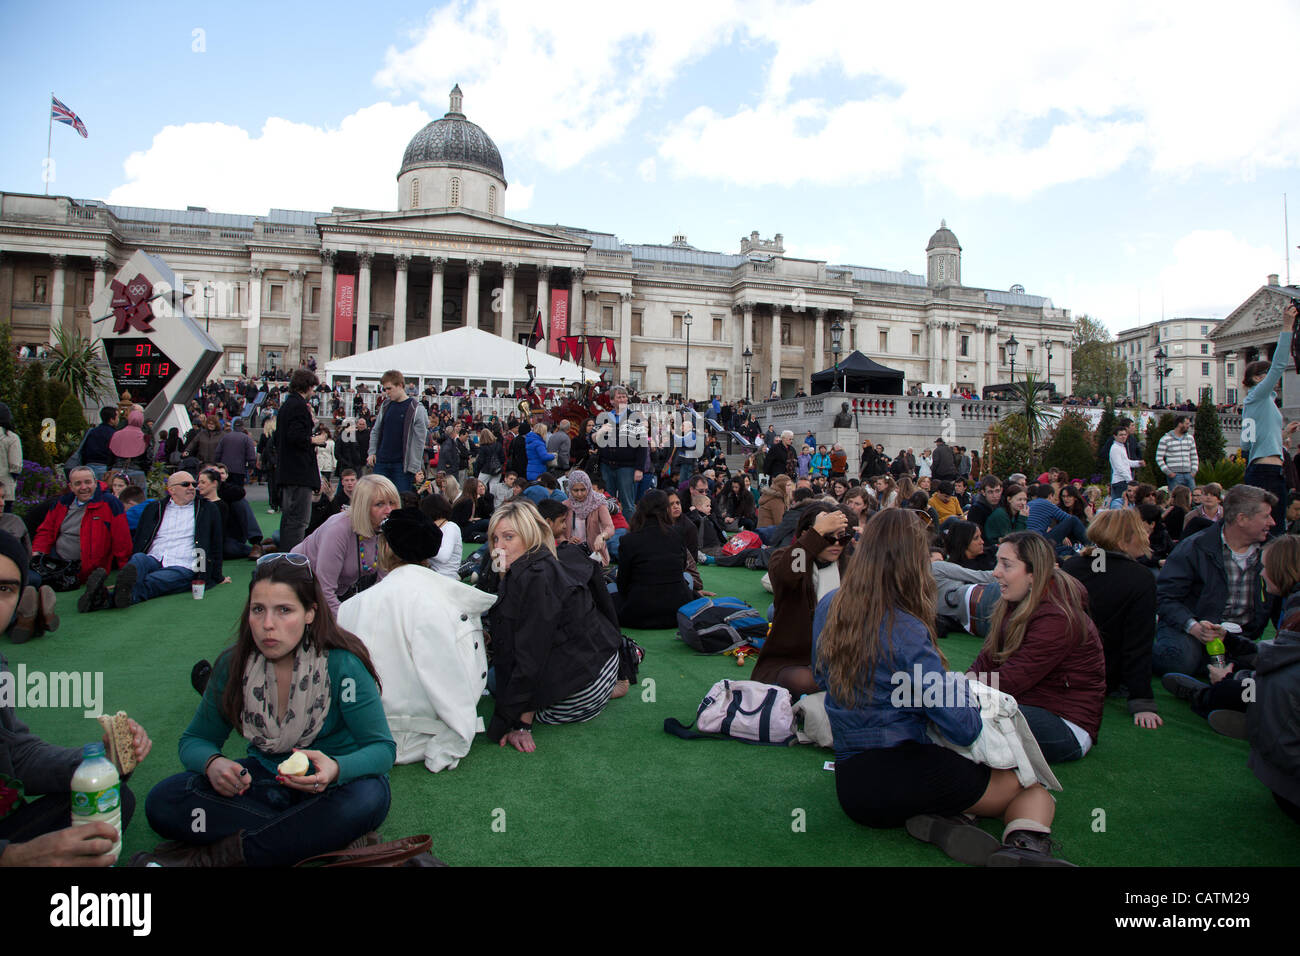 LONDON, UK. 21st Apr 2012 Trafalgar Square was turned into an English Garden for the St George's Day Festival. It featured pop-up gardening installations, floral art and exhibits of growing your own fruit and veg. A bandstand hosted traditional and modern musicians. Stock Photo